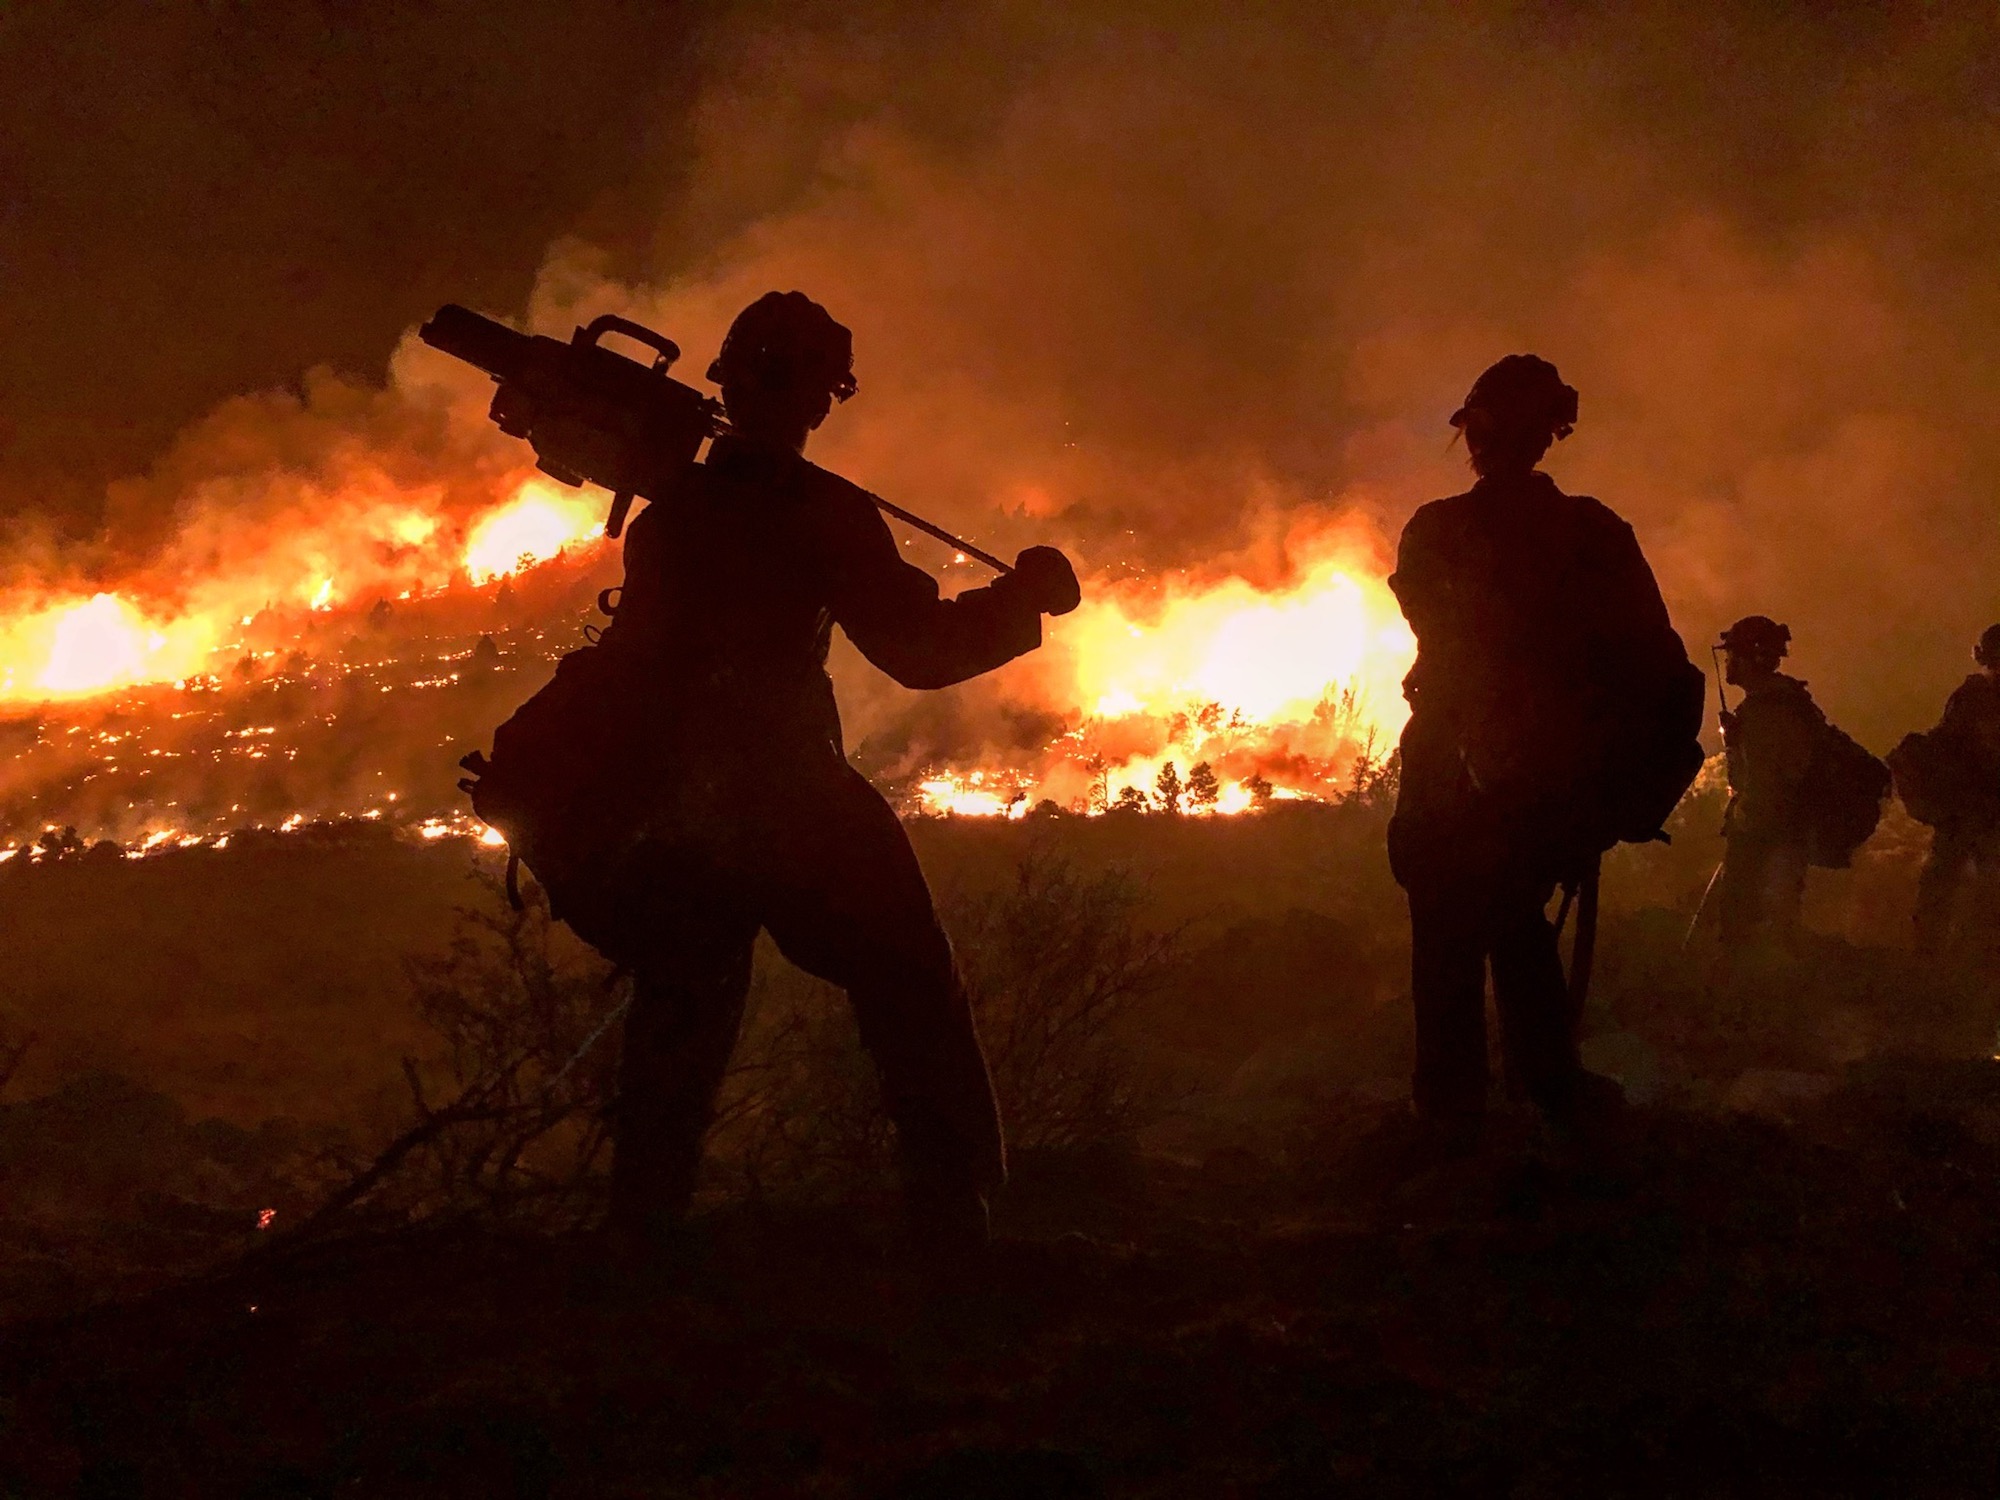 Fire blazing in the backgroud with two hot shot silhouetted in the foreground as they attempt to fight California wildfires